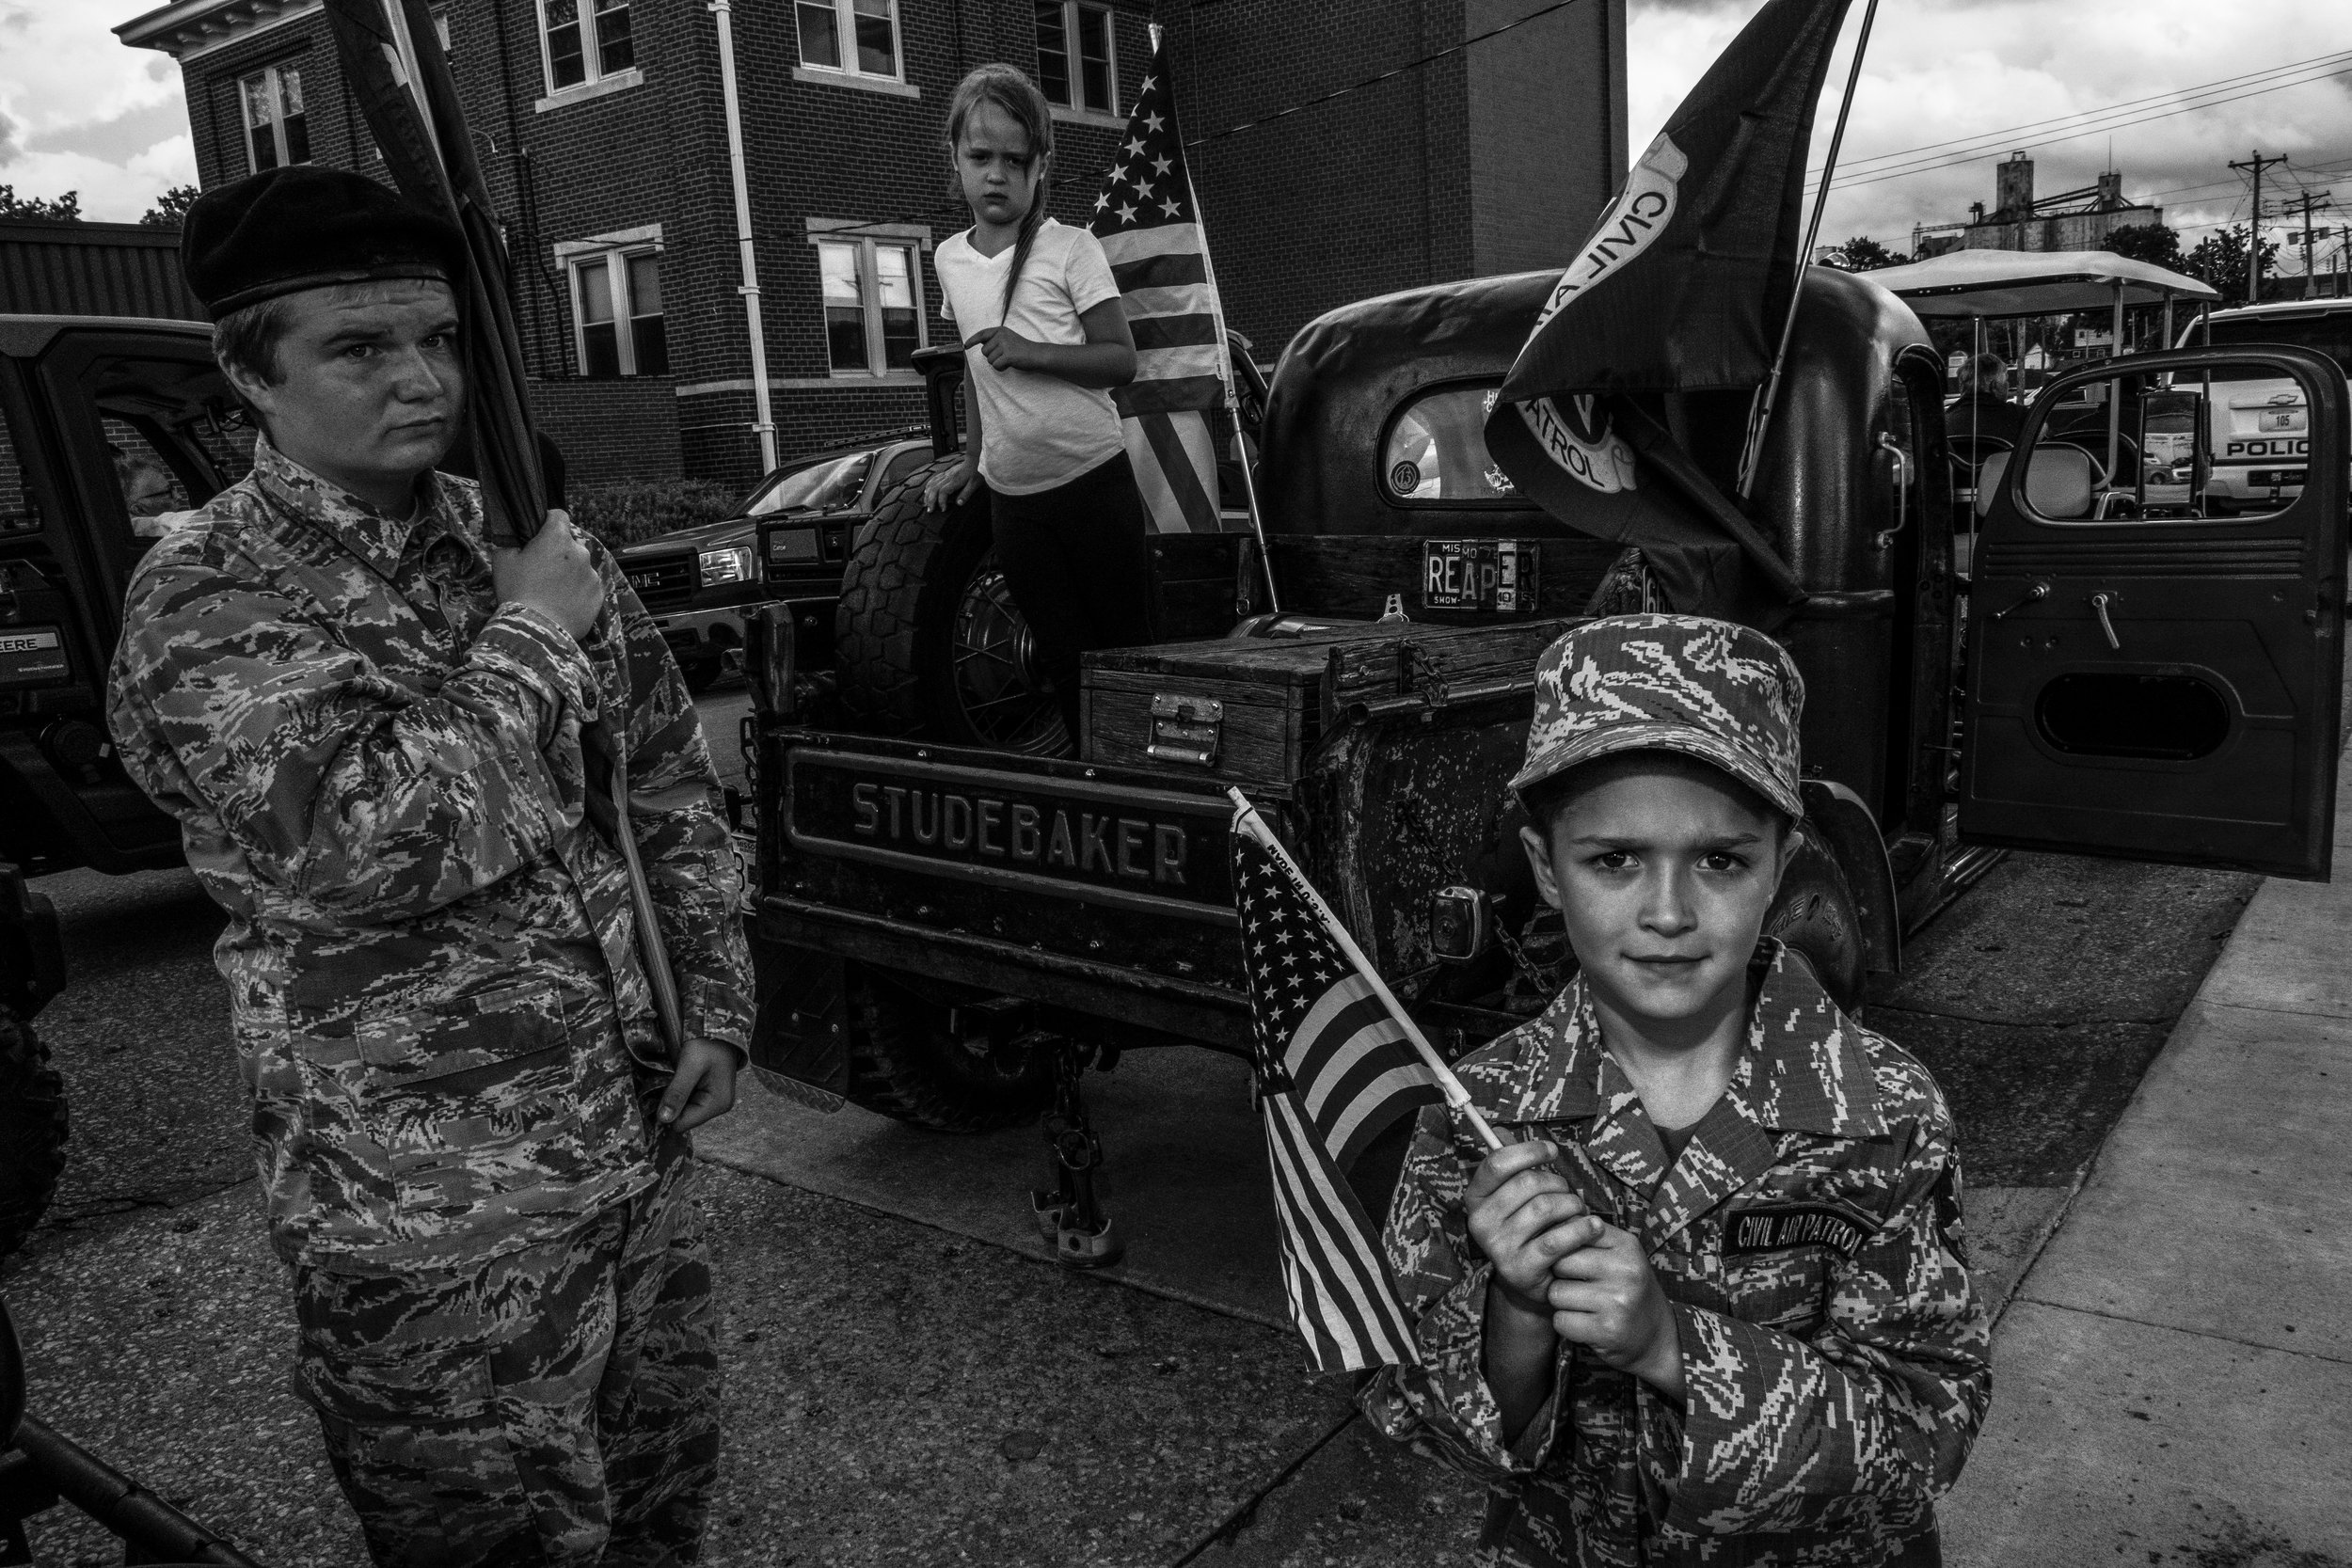  The Zumsteg kids pose for a portrait during the Real American Heroes parade in Mexico, Missouri on Wednesday, Jun. 2019. 